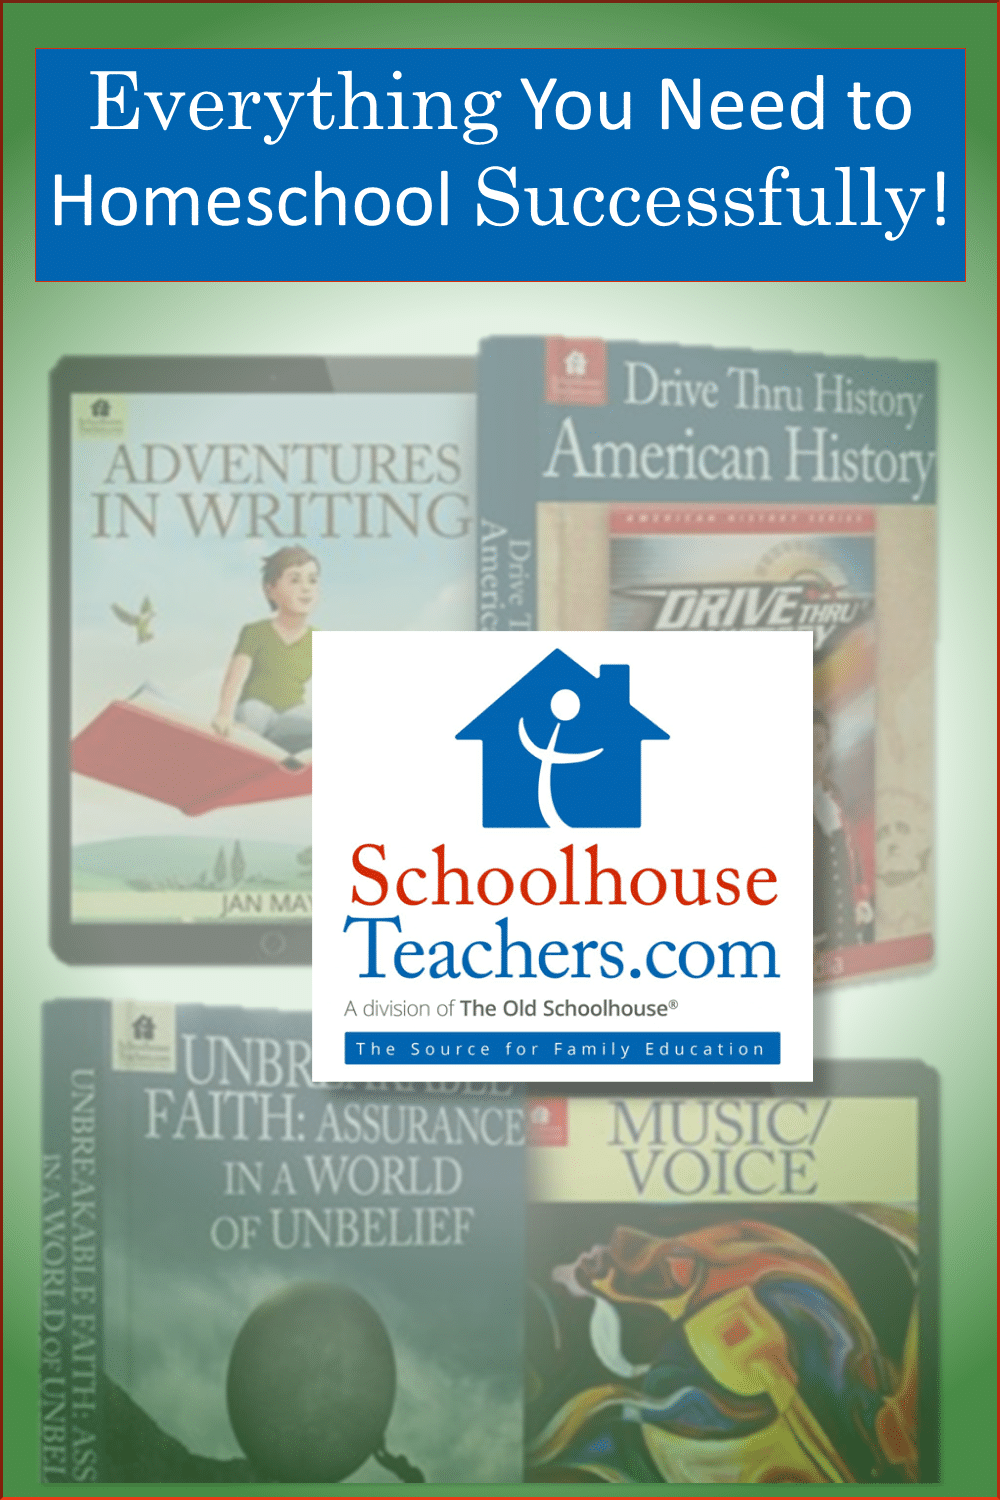 Everything You need to Homeschool Successfully with SchoolhouseTeachers.com Reviewed by HomeschoolingHighway.com